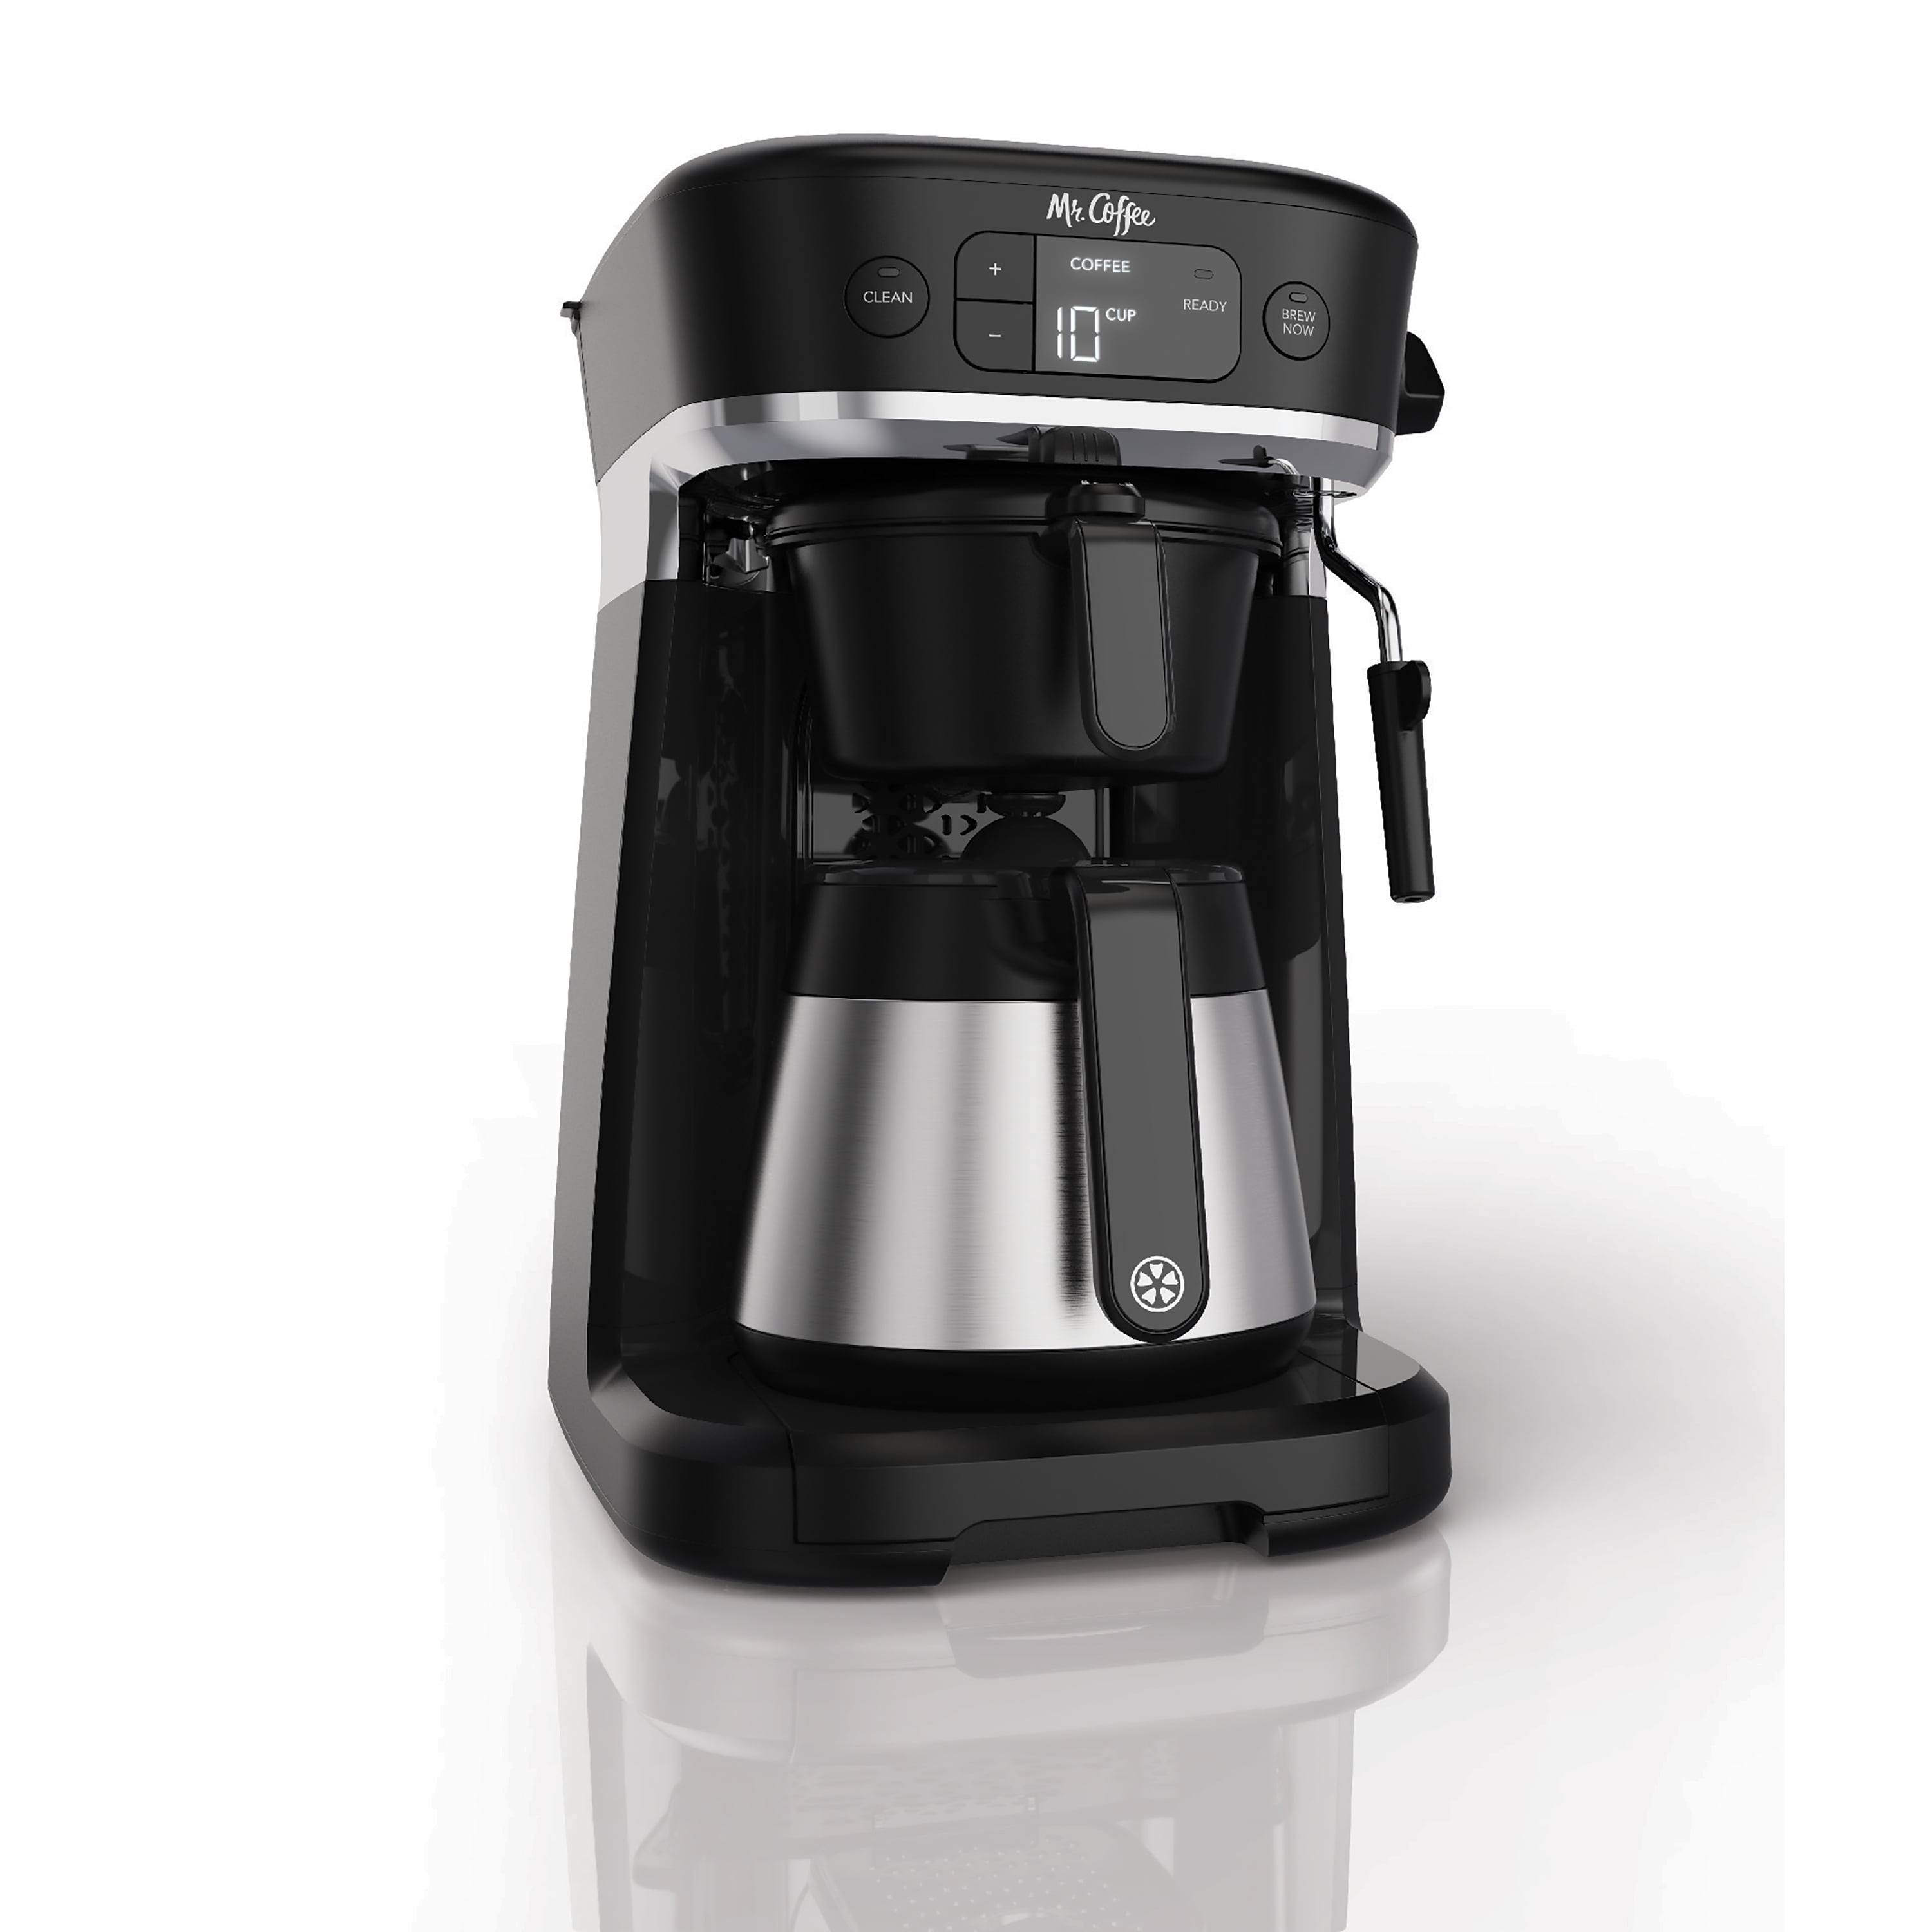 This 2-in-1 coffee maker is on sale for $60 on : 'Perfect